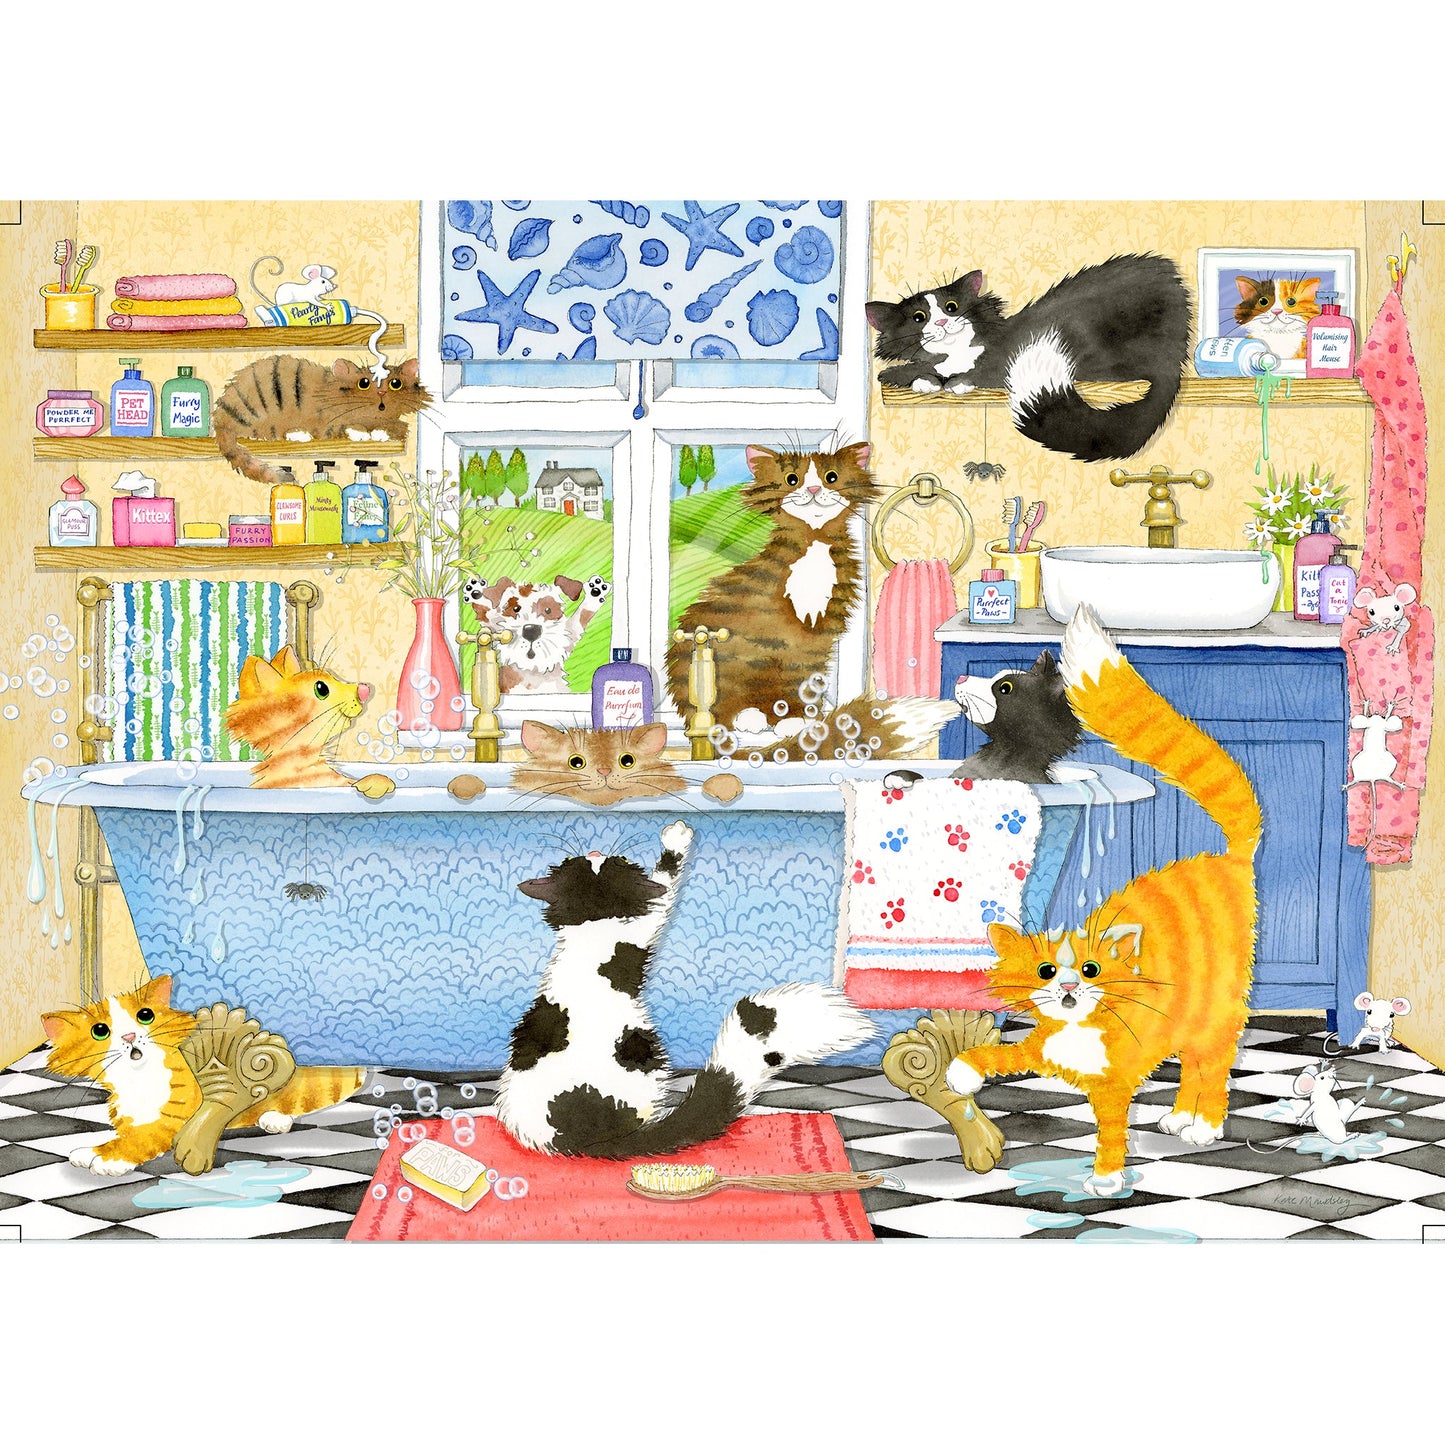 Gibsons - Catastrophe Cottage - 4 x 500 Piece Jigsaw Puzzles